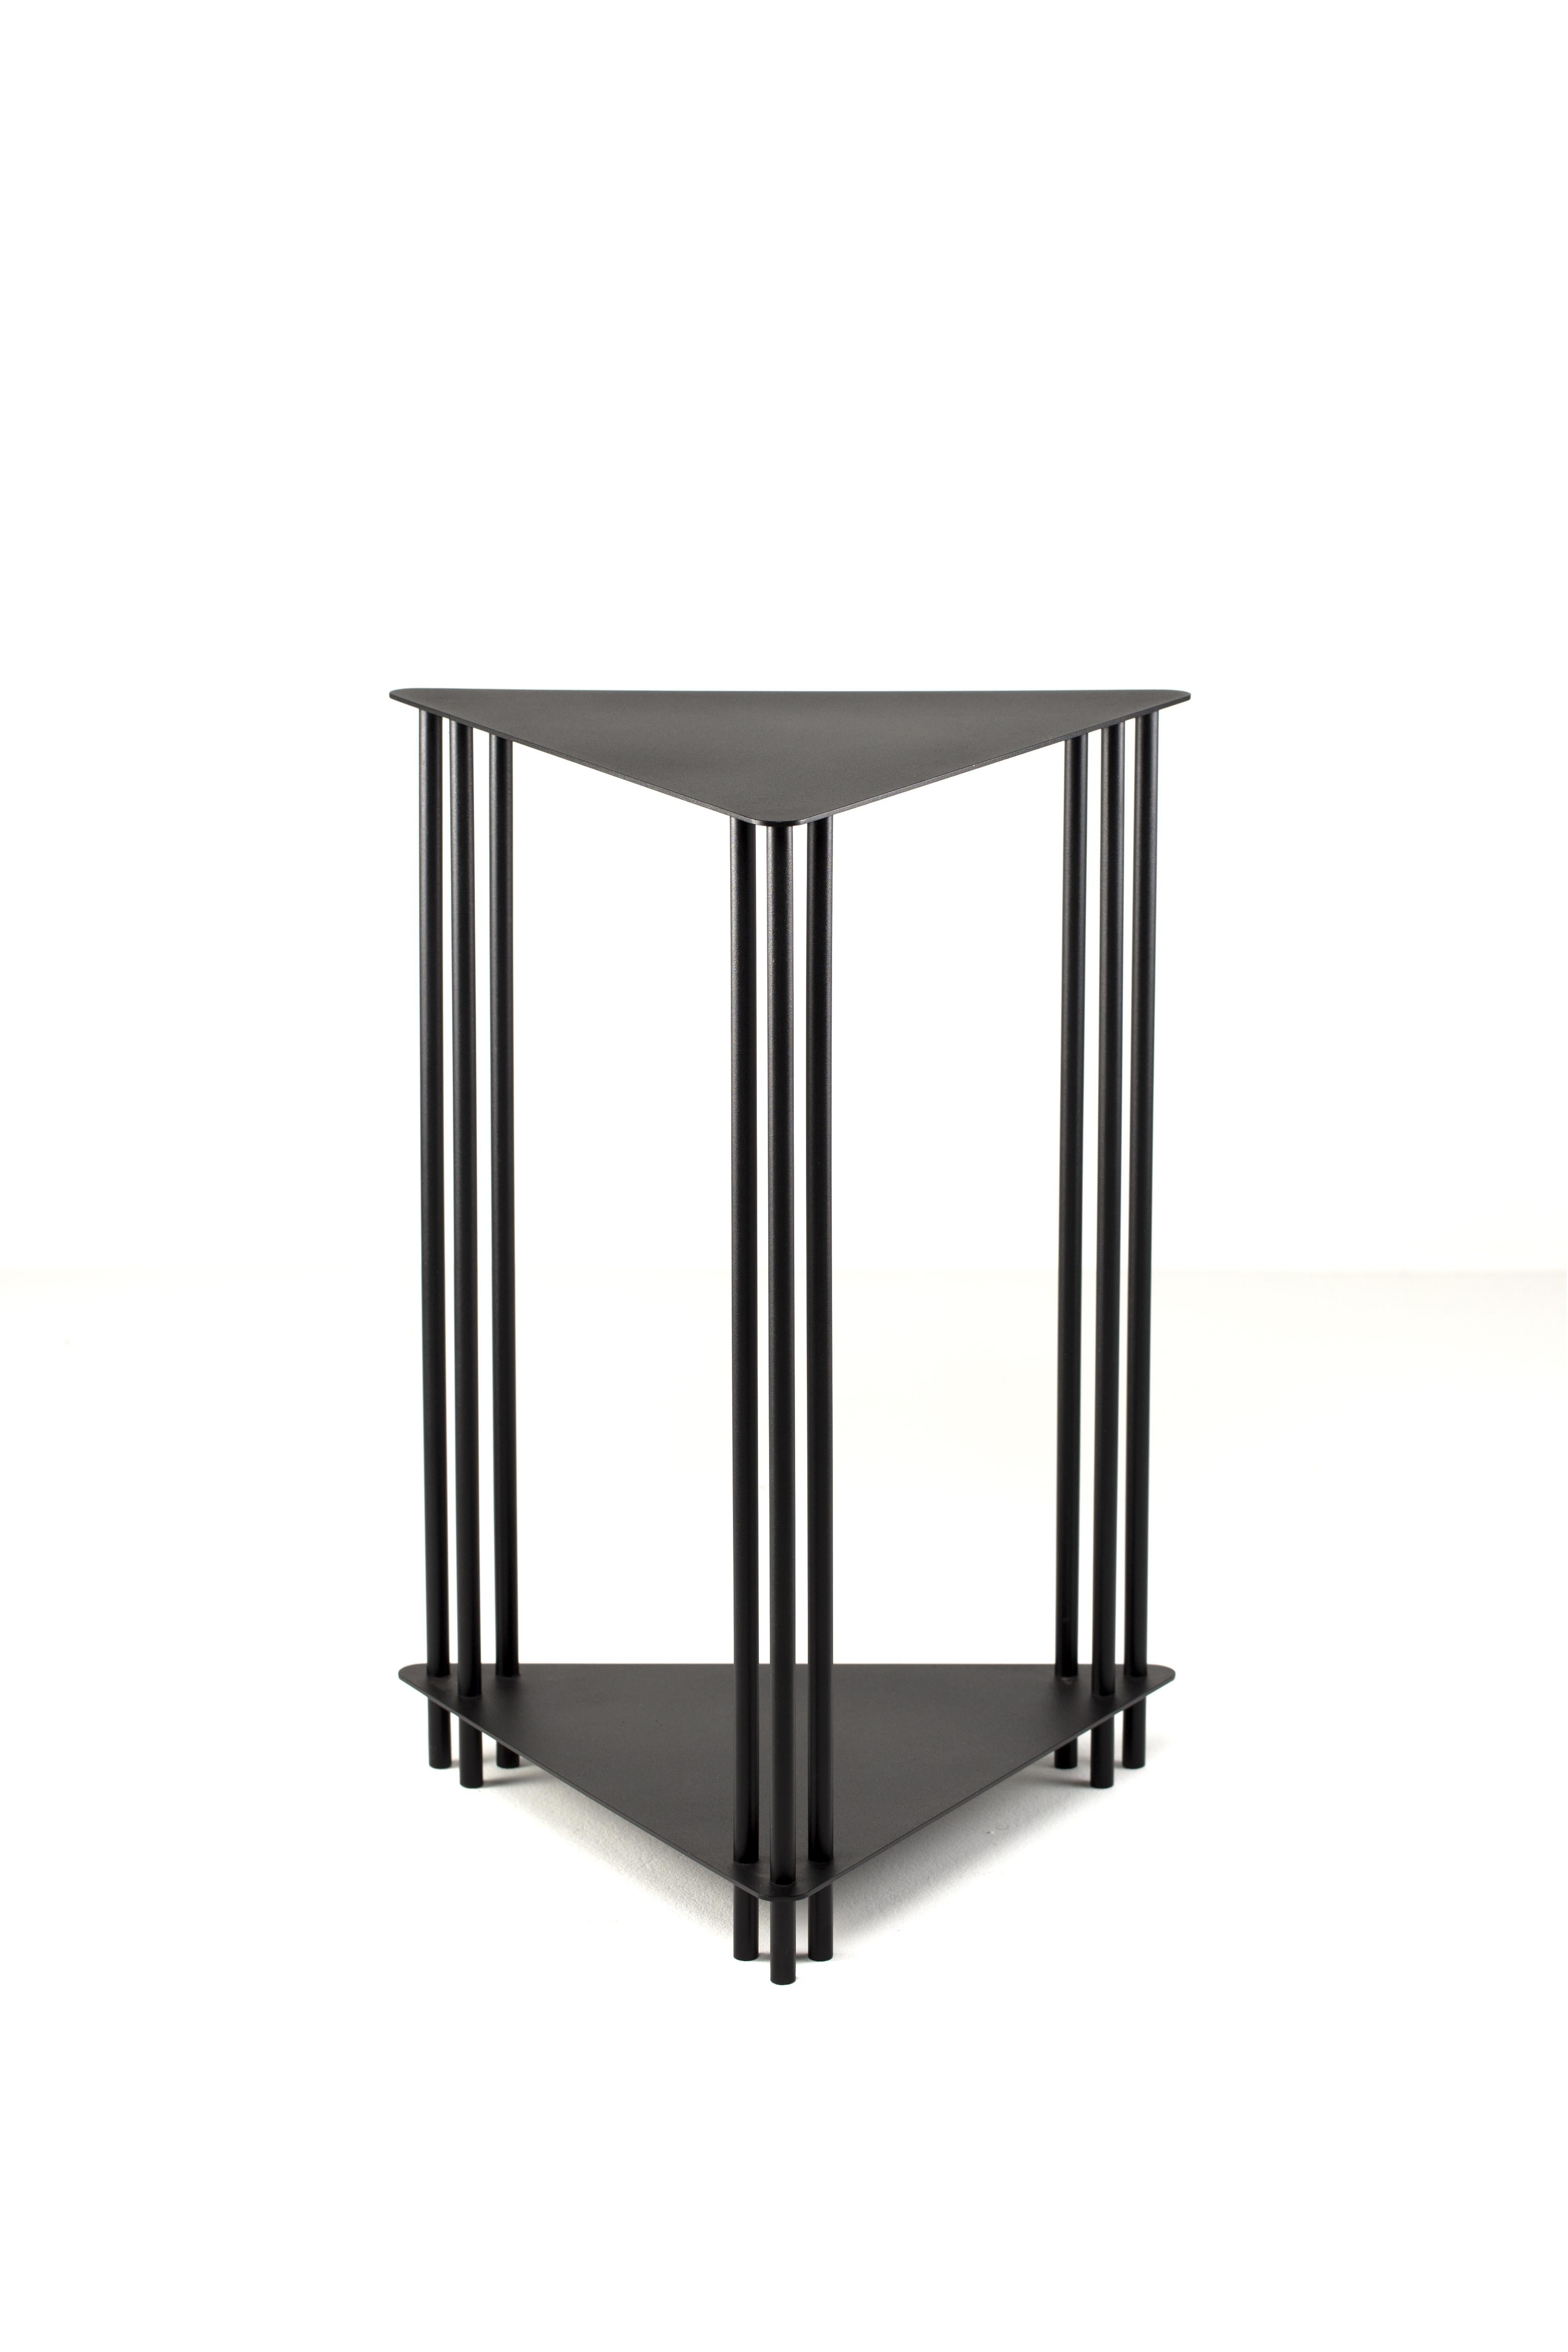 The support table is part of the Dureza collection. Carbon steel reigns as raw material, guiding both simple and rigorous forms, and the graphic language of this new series. The solid and geometric character of the metal plates dialogues with the